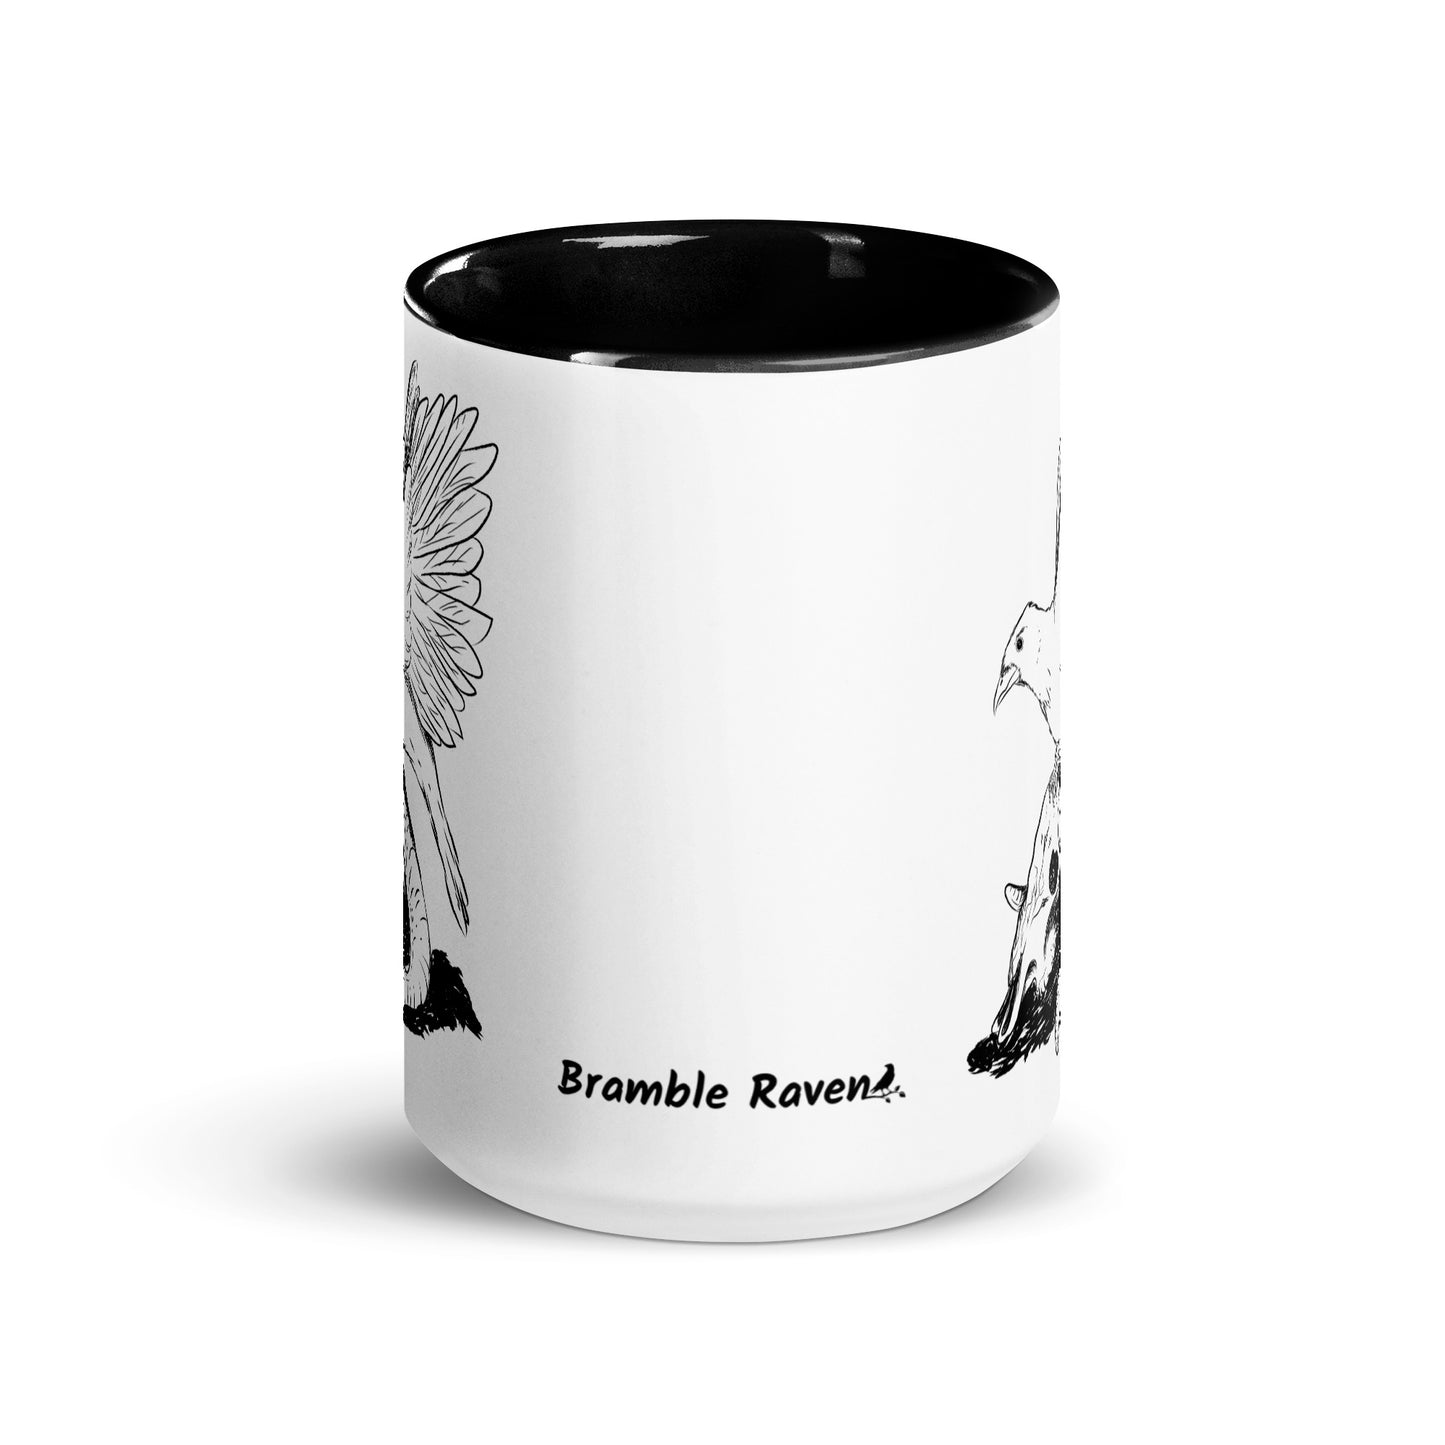 15 ounce white ceramic mug with black handle and inside. Features a double sided print of Reflections, a design with a crow sitting on a sheep skull. Dishwasher and microwave safe. Front view.